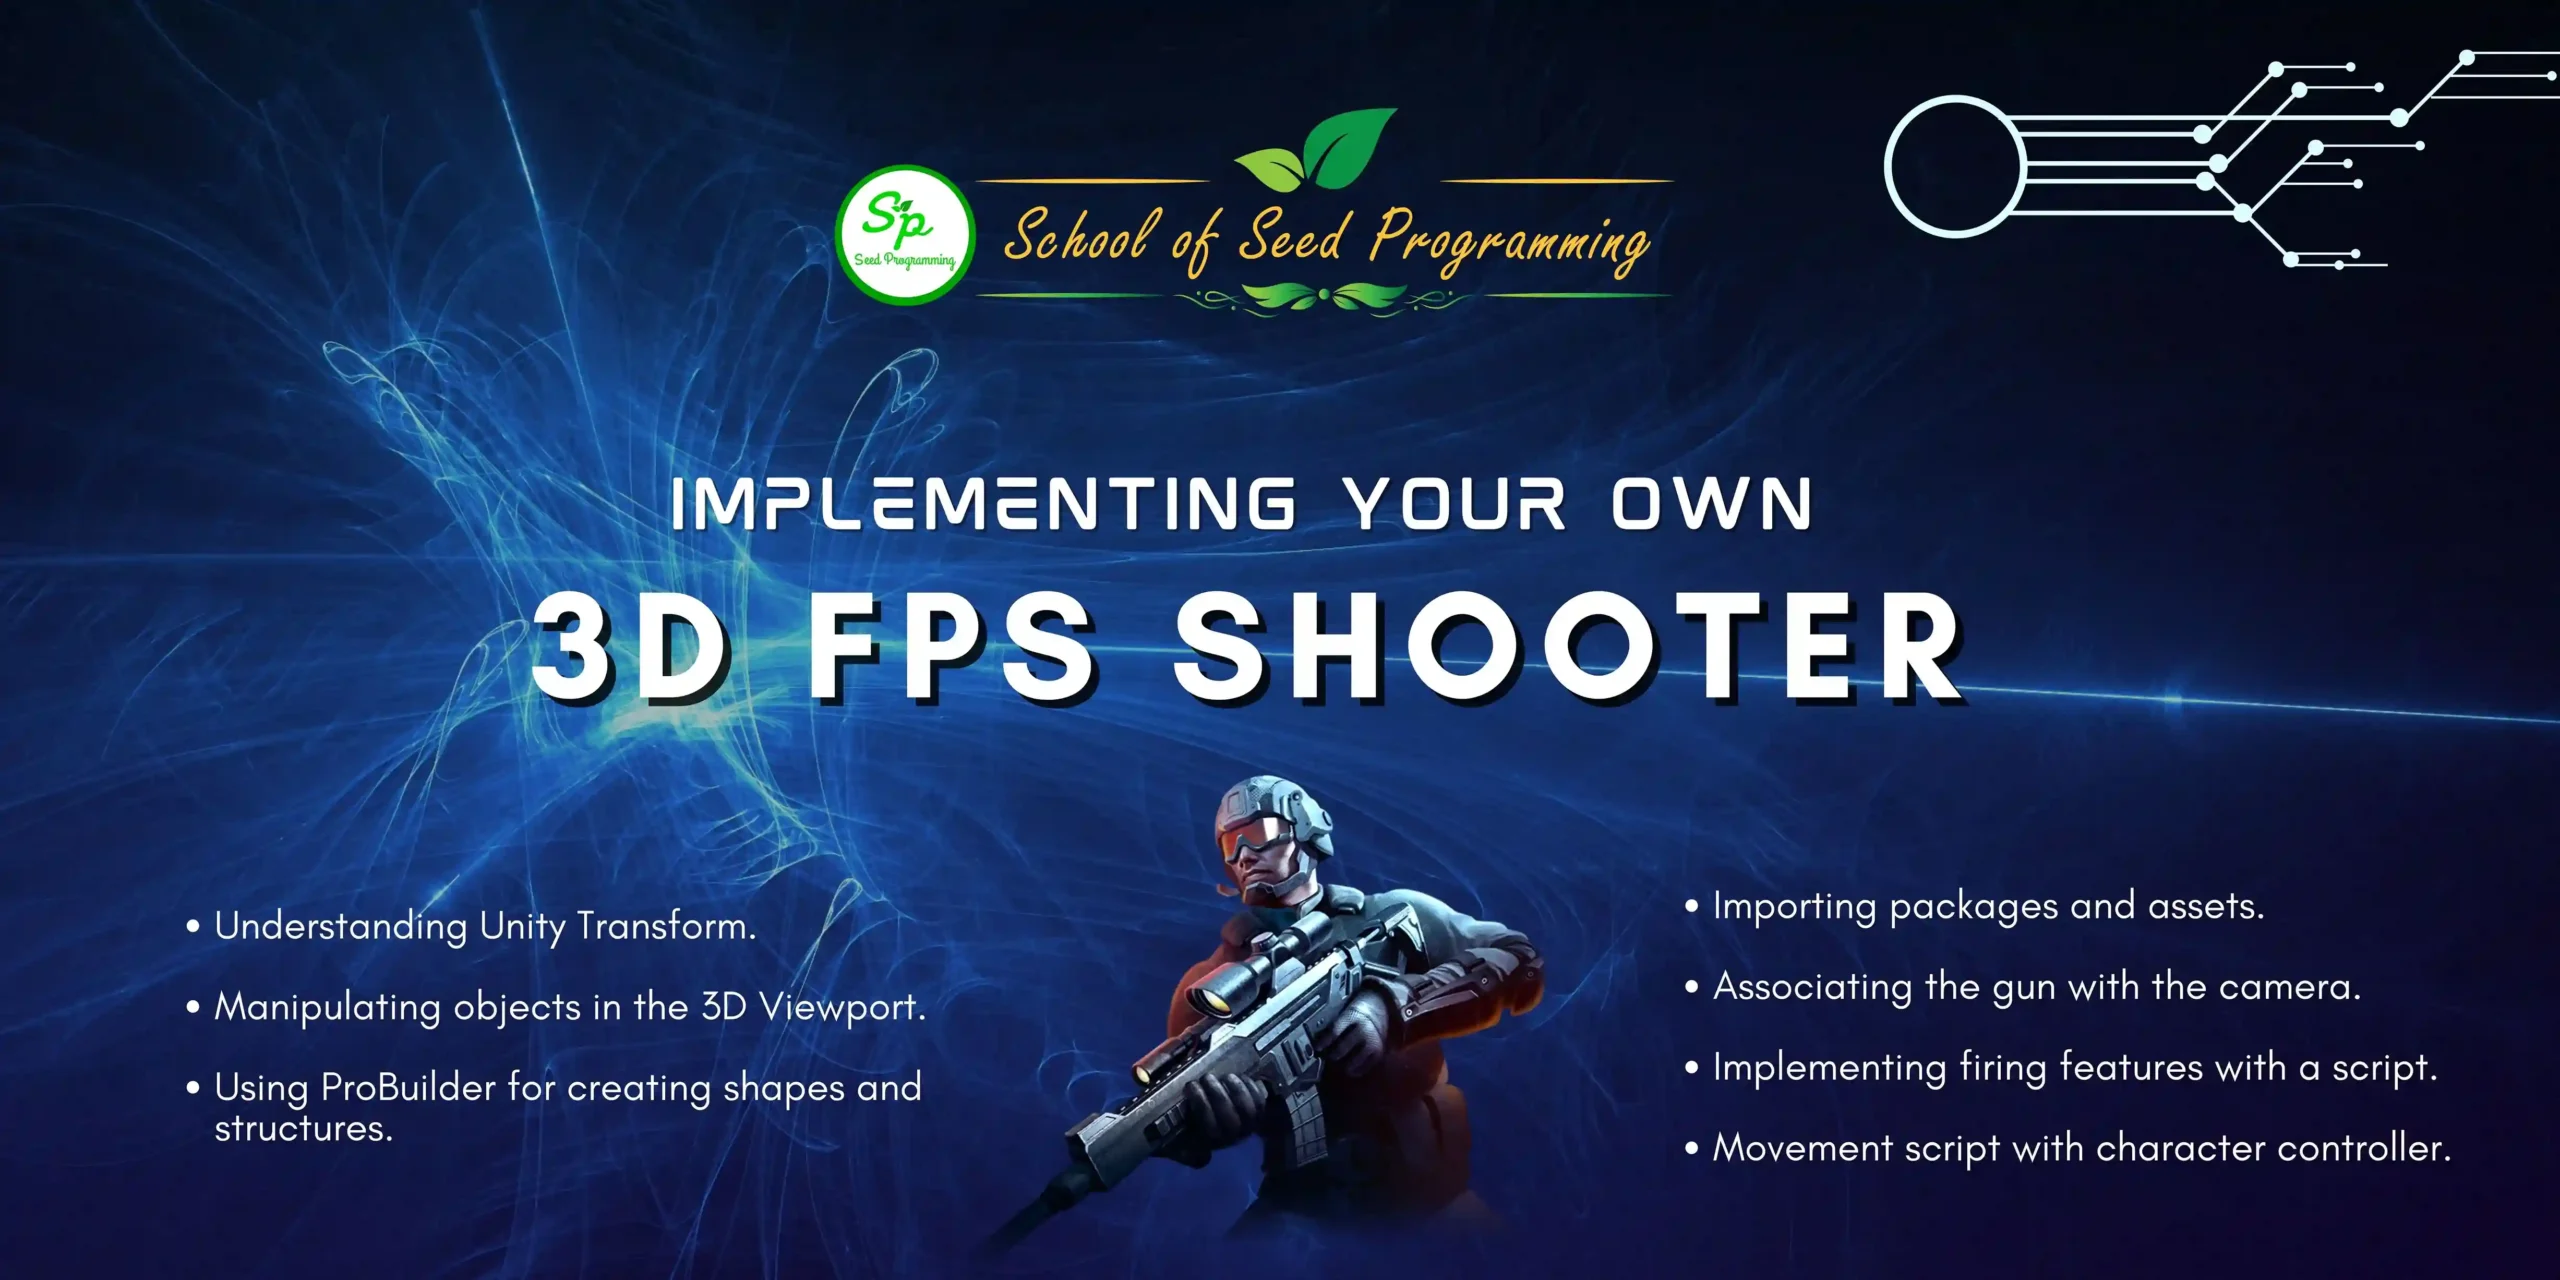 Implementing 3D FPS Shooter Game in Unity